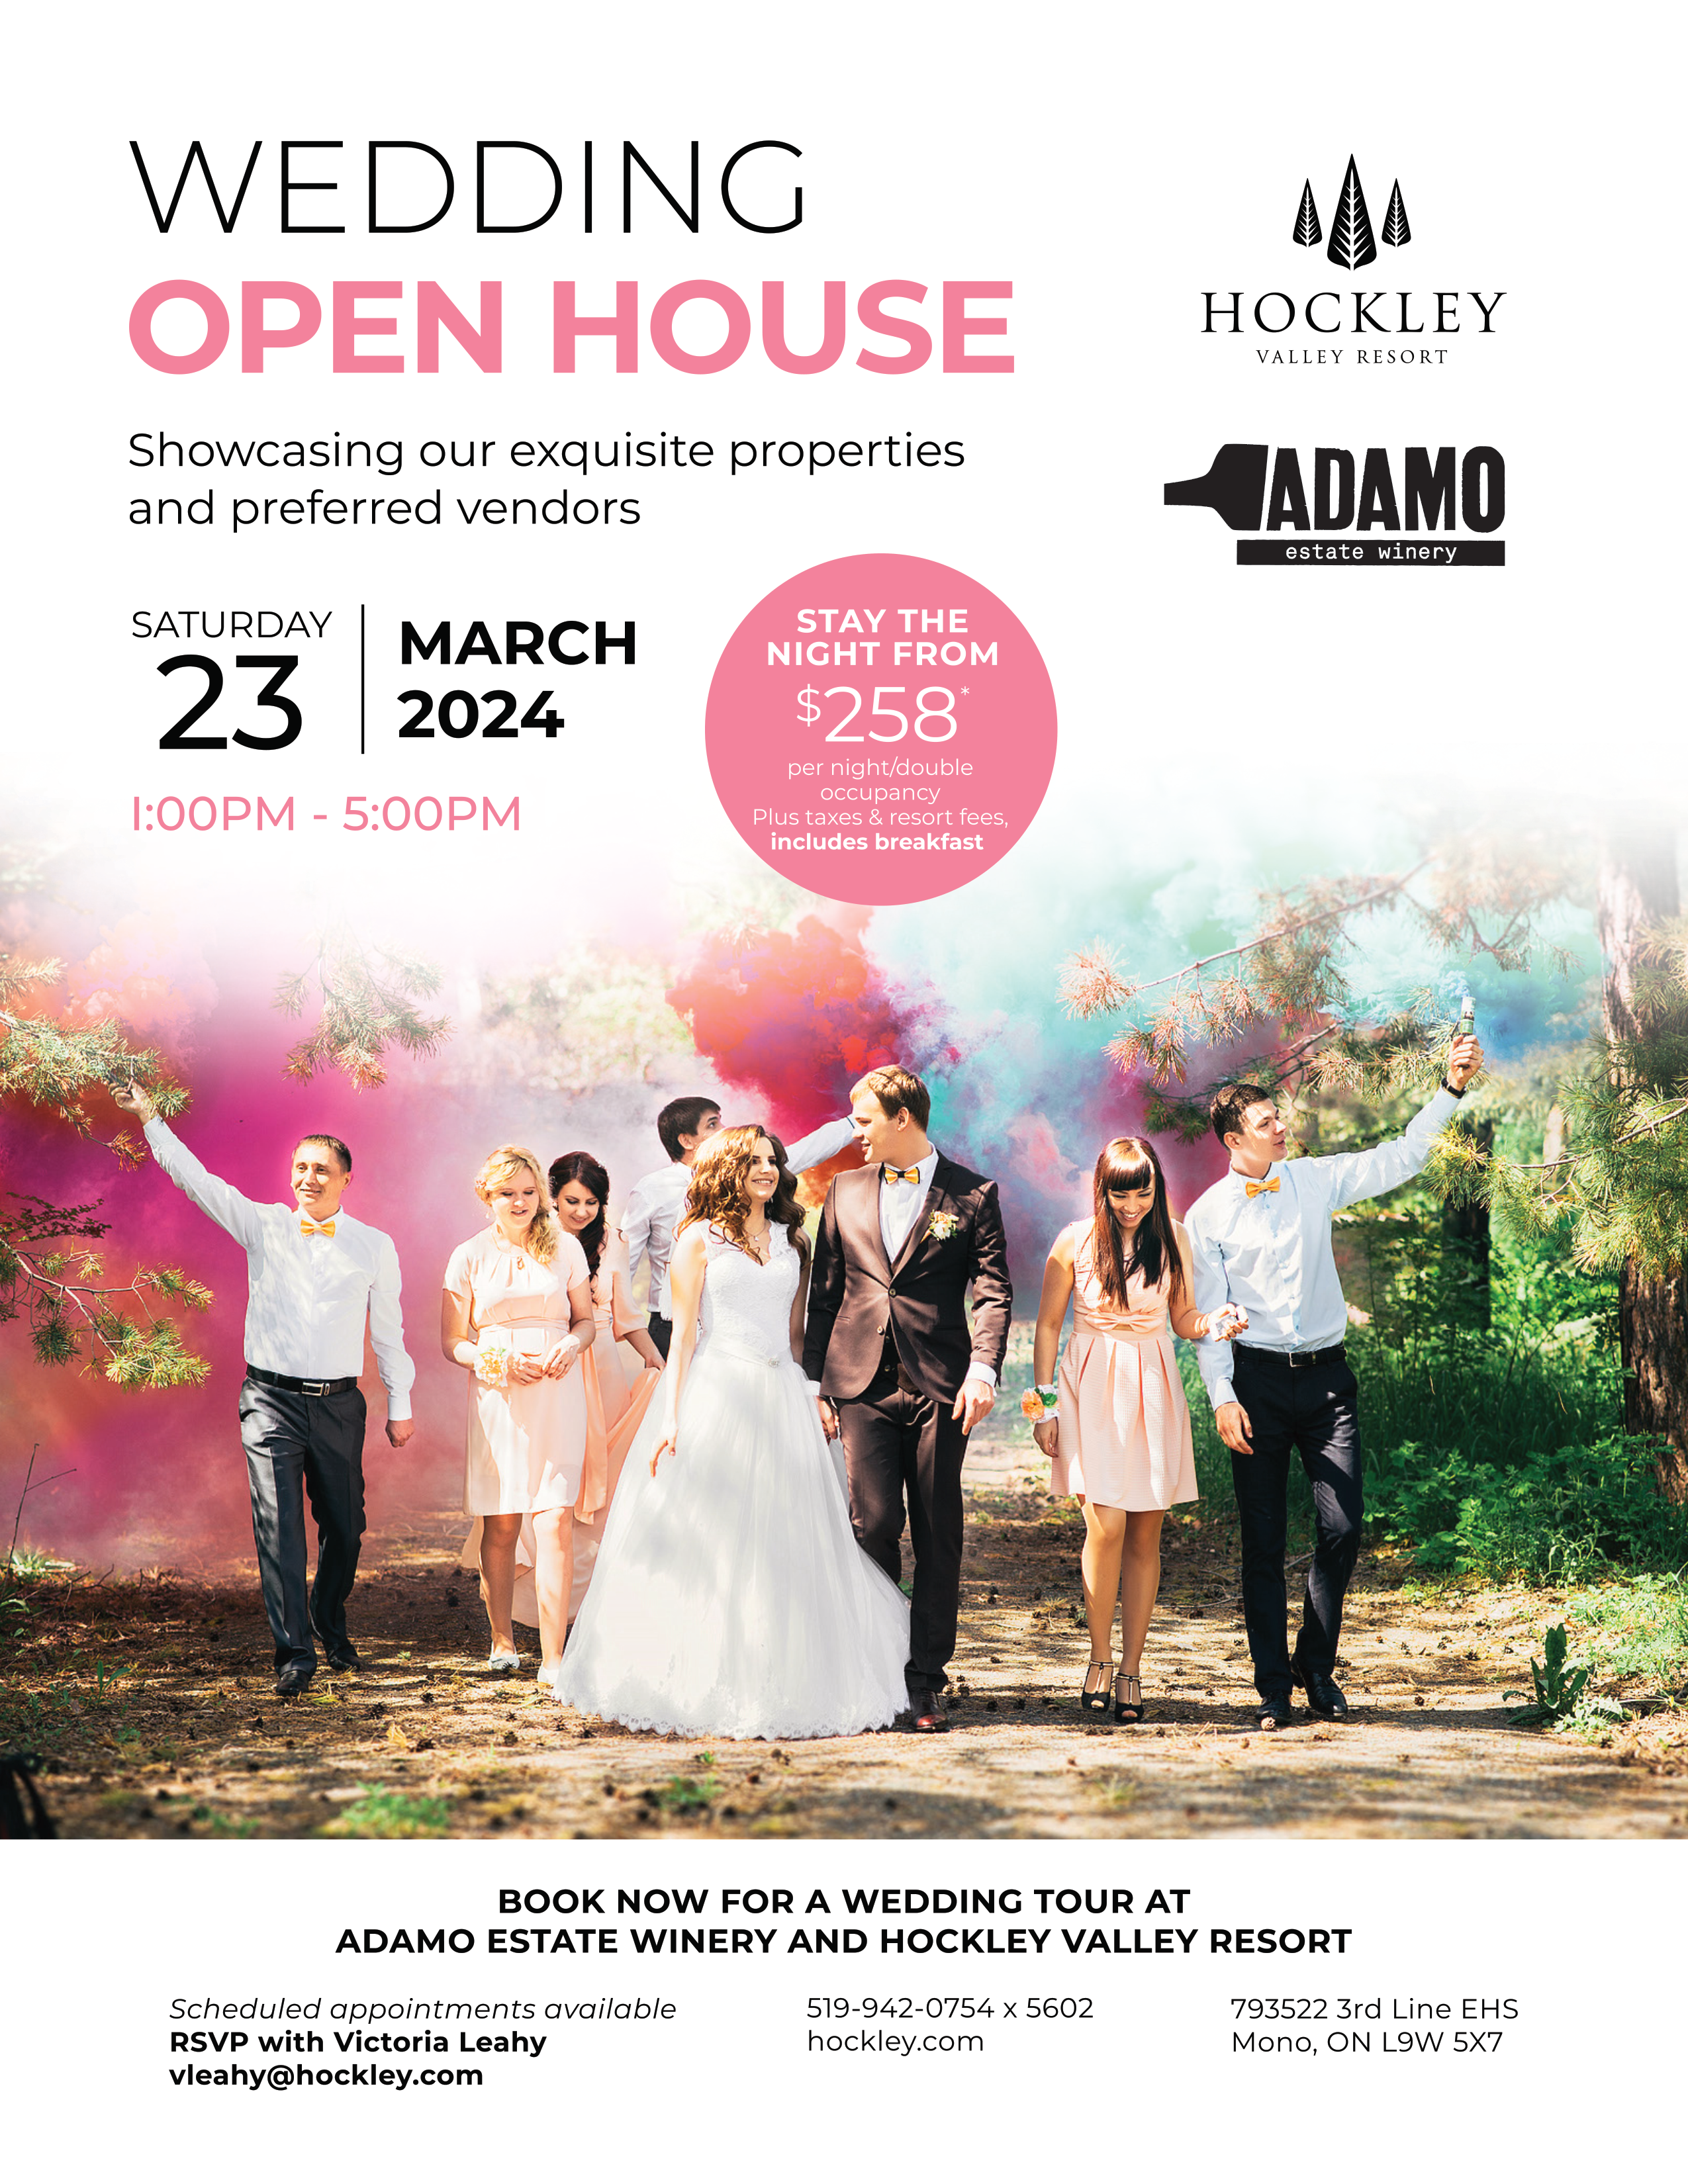 wedding open house flyer, bridal party walking and posing